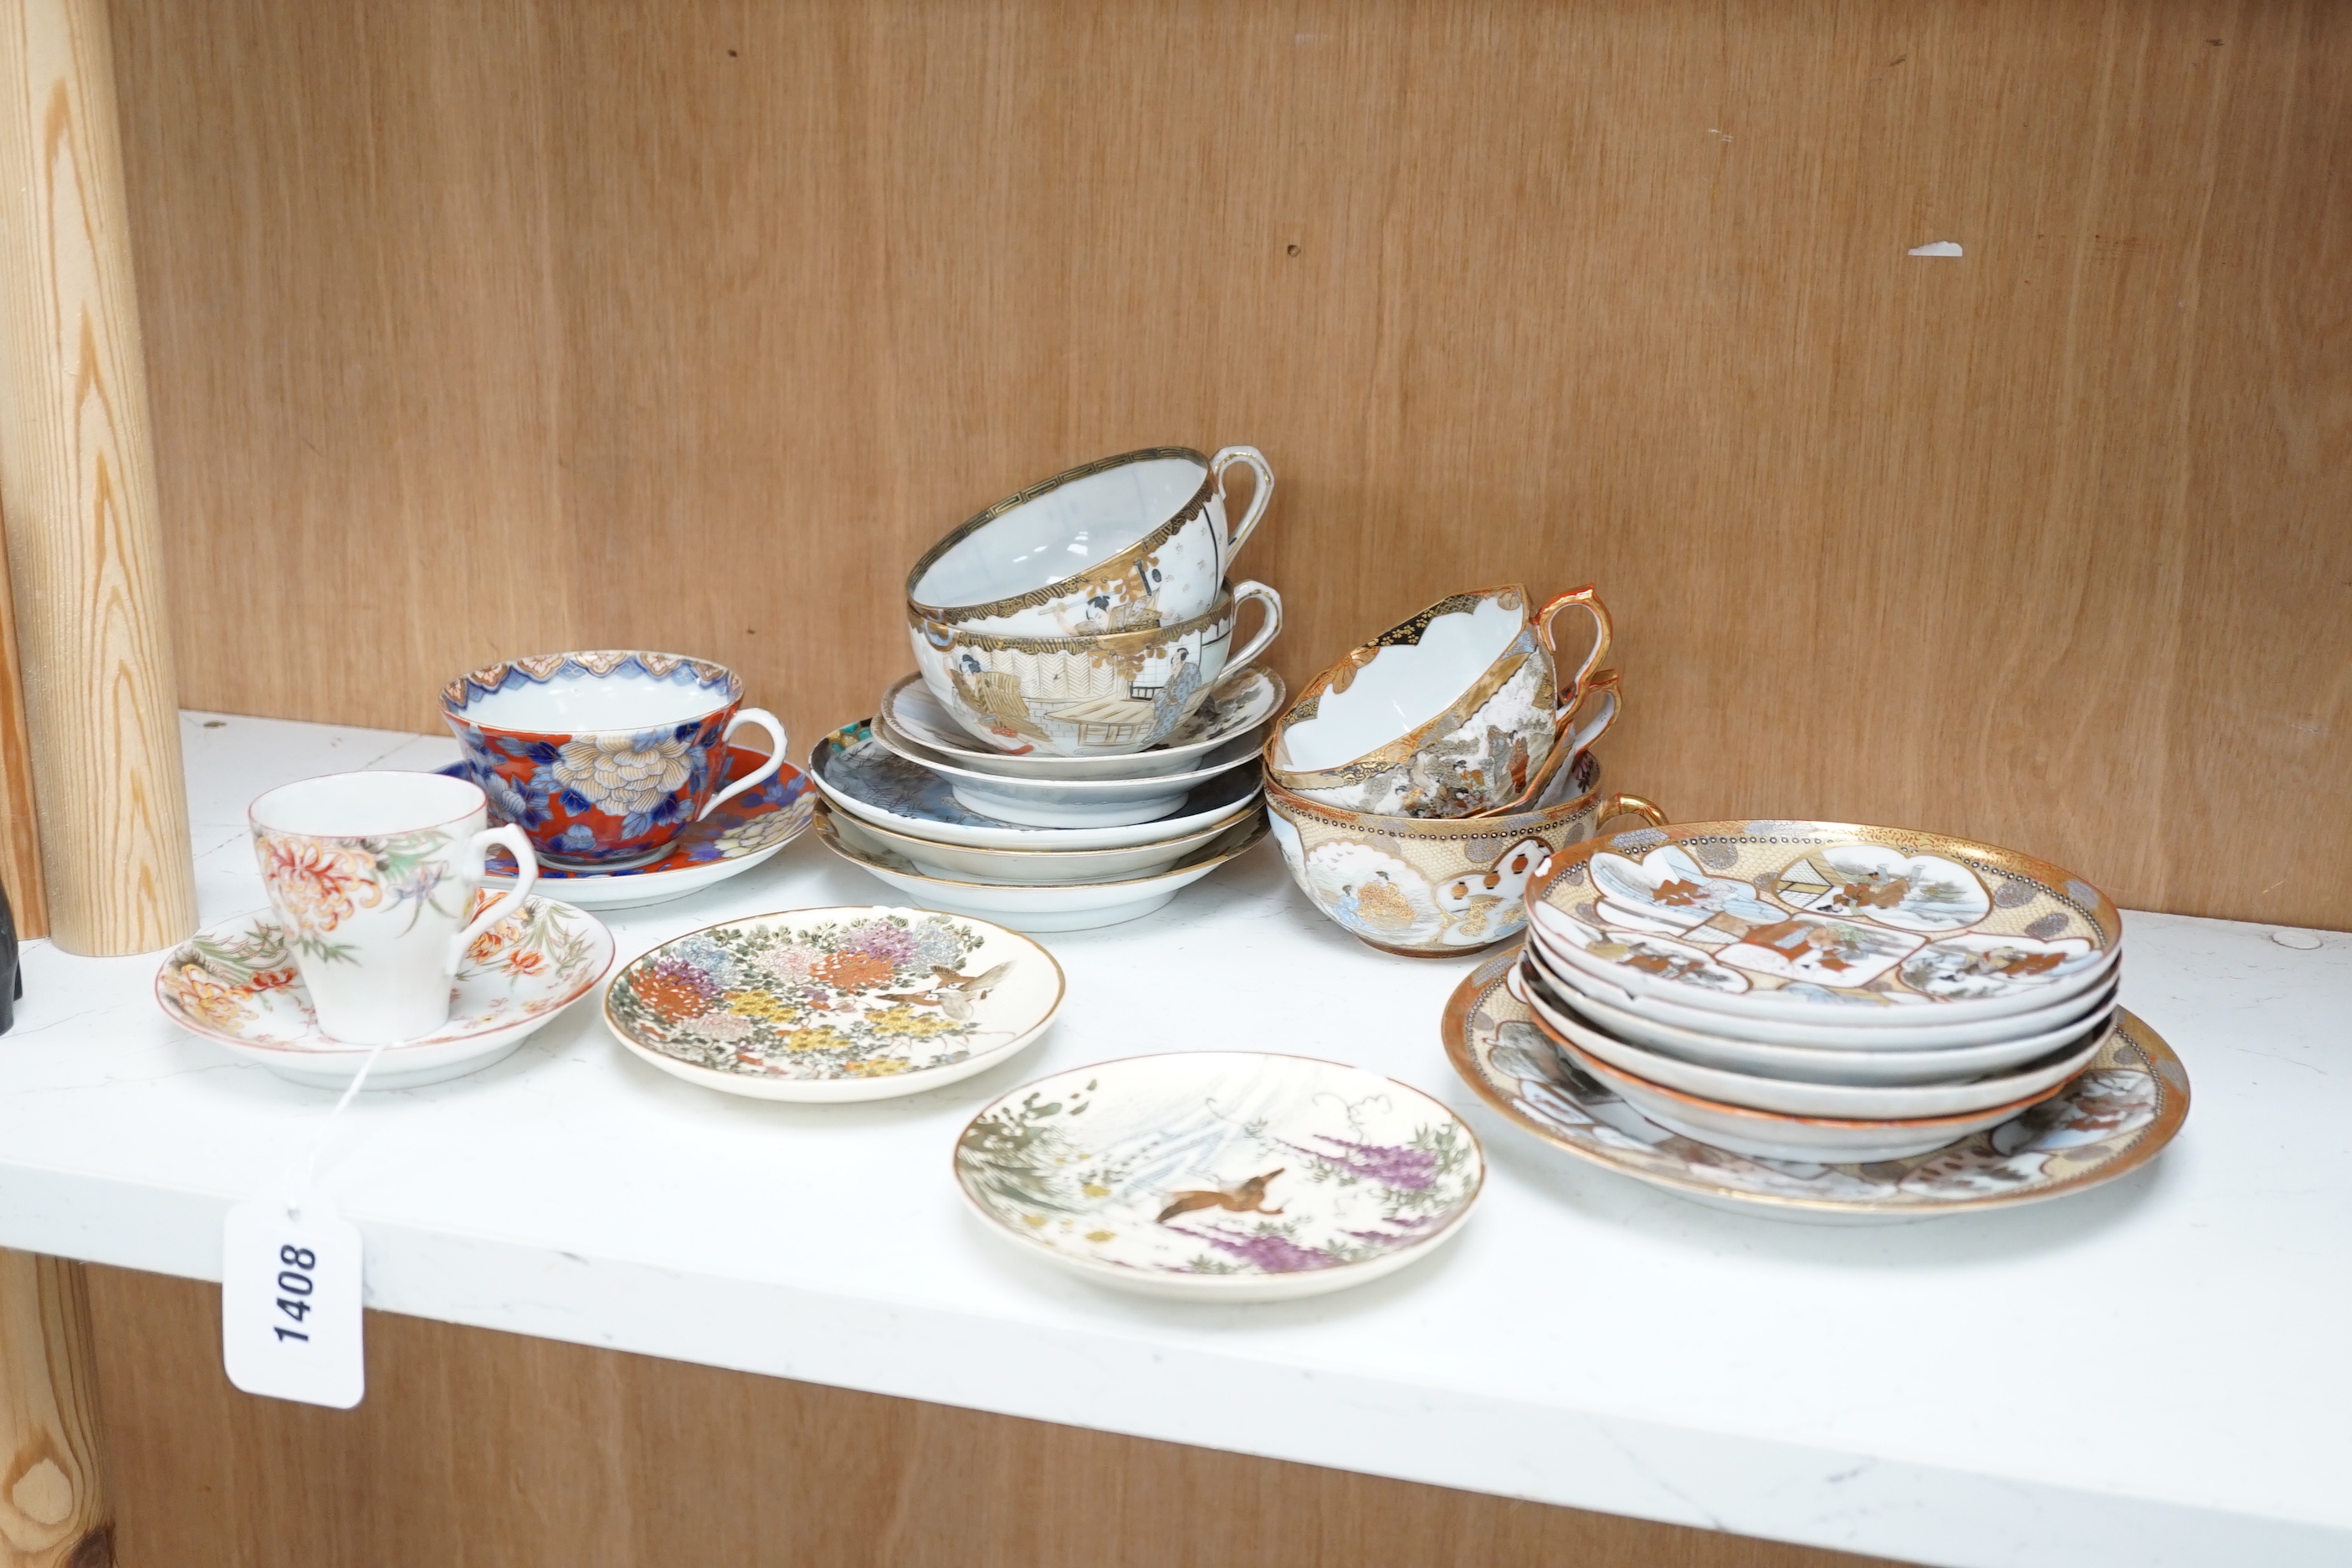 A group of Japanese ceramics, Meiji period and later including satsuma saucers and Imari cup and saucer, largest 17cm in diameter